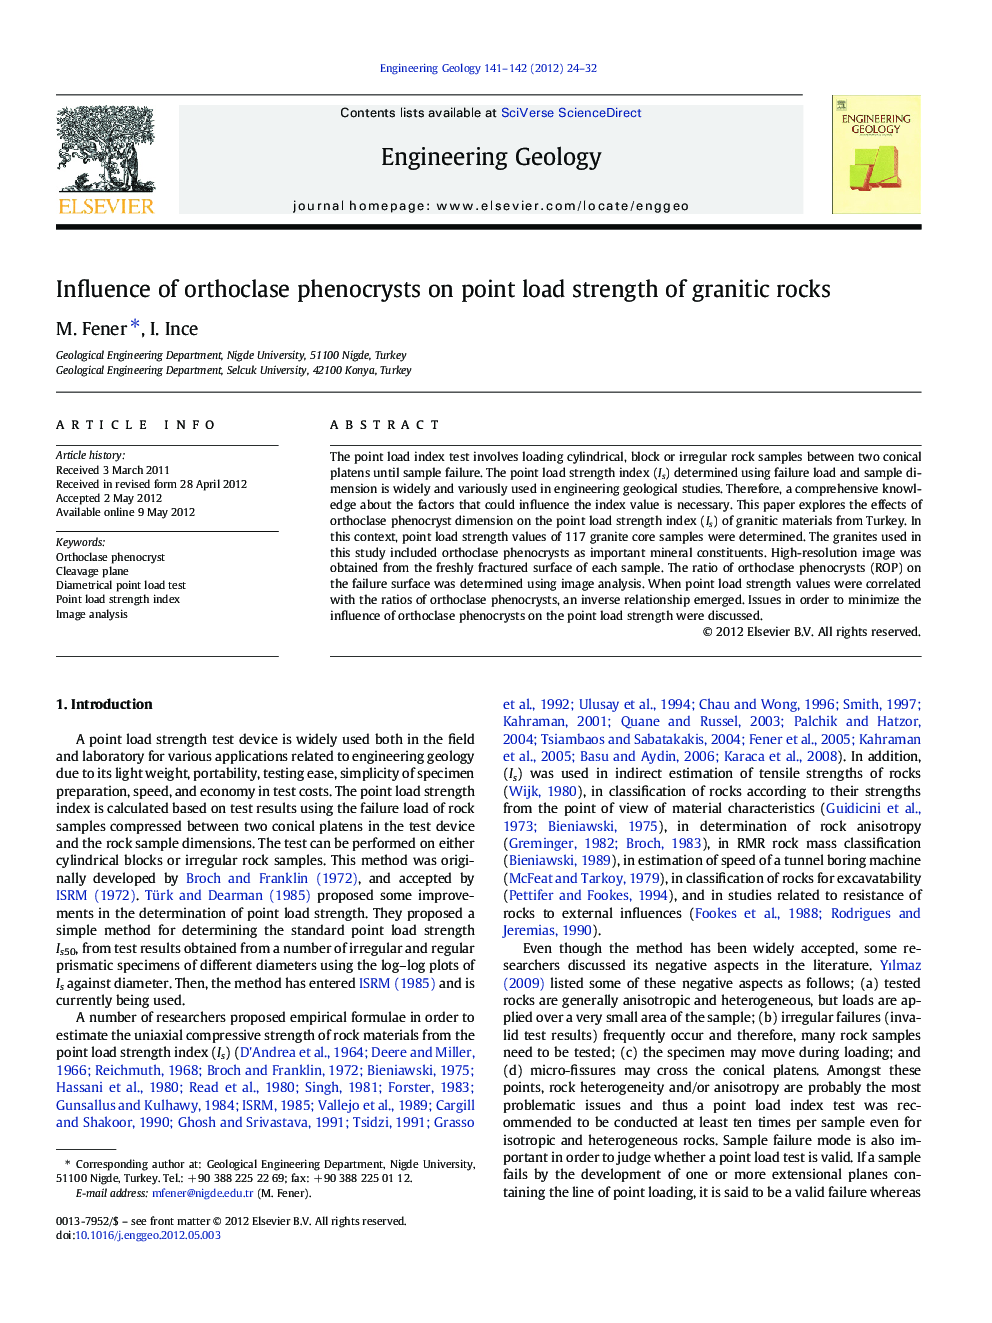 Influence of orthoclase phenocrysts on point load strength of granitic rocks